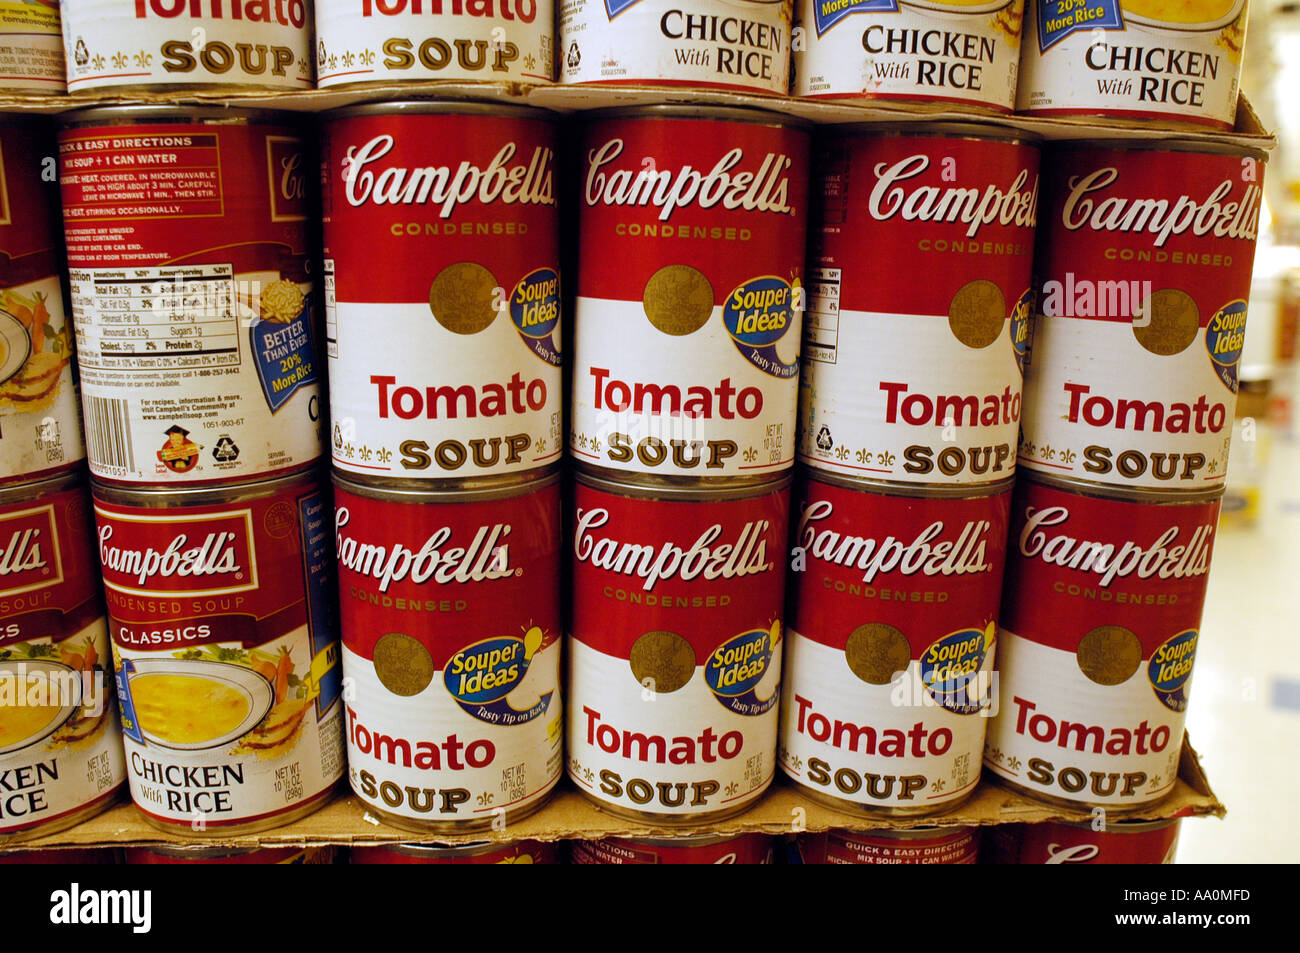 A display of Campbell s soups in a supermarket Stock Photo